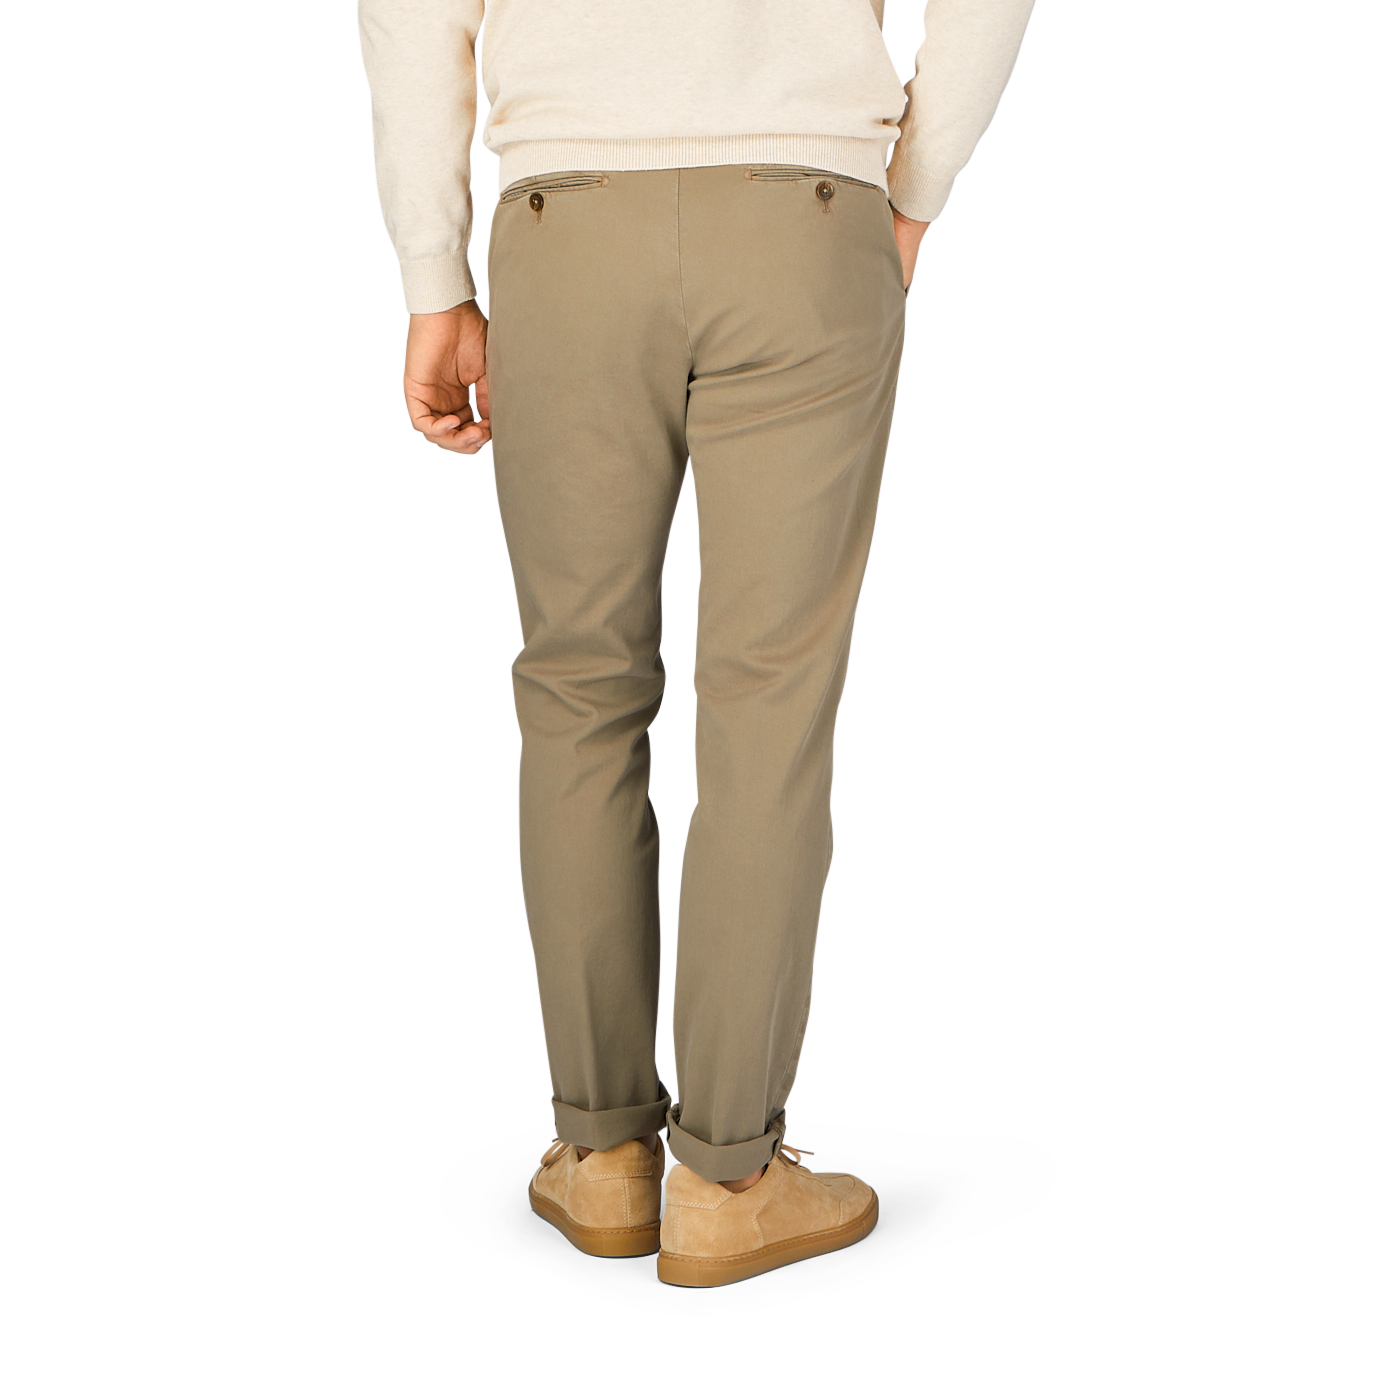 The back view of a man wearing Briglia's Olive Green Cotton Stretch BG62 Casual Chinos.